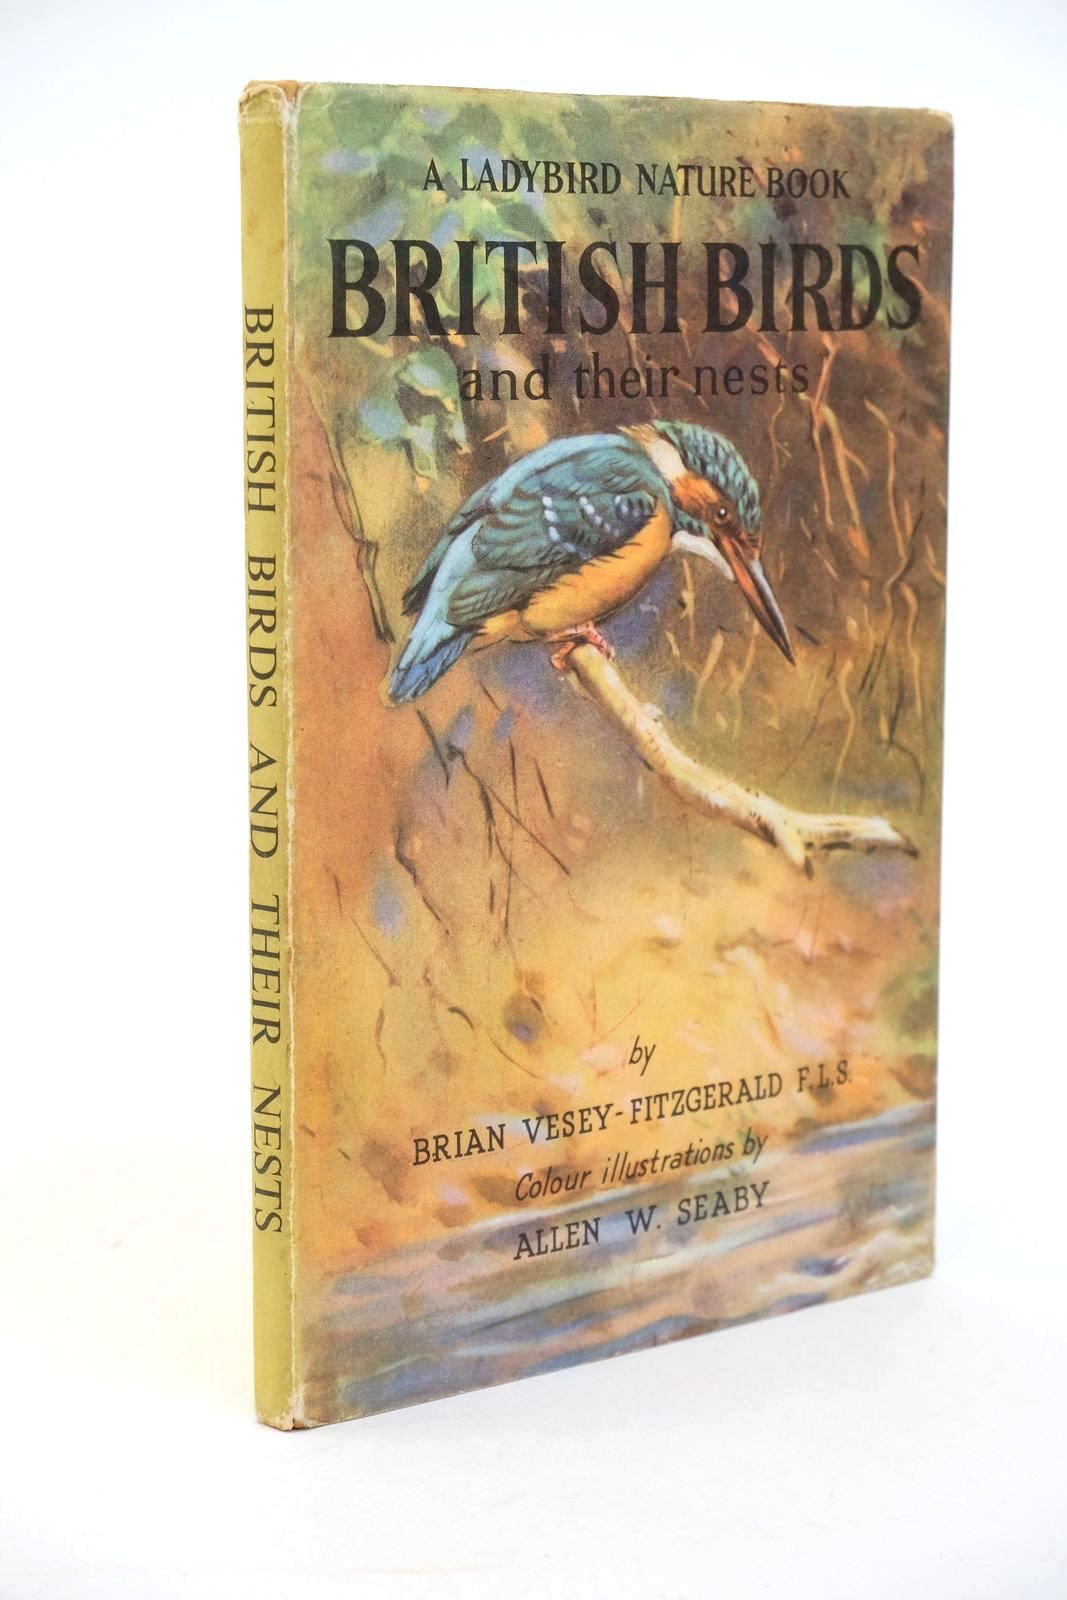 Photo of BRITISH BIRDS AND THEIR NESTS written by Vesey-Fitzgerald, Brian illustrated by Seaby, Allen W. published by Wills & Hepworth Ltd. (STOCK CODE: 1323140)  for sale by Stella & Rose's Books